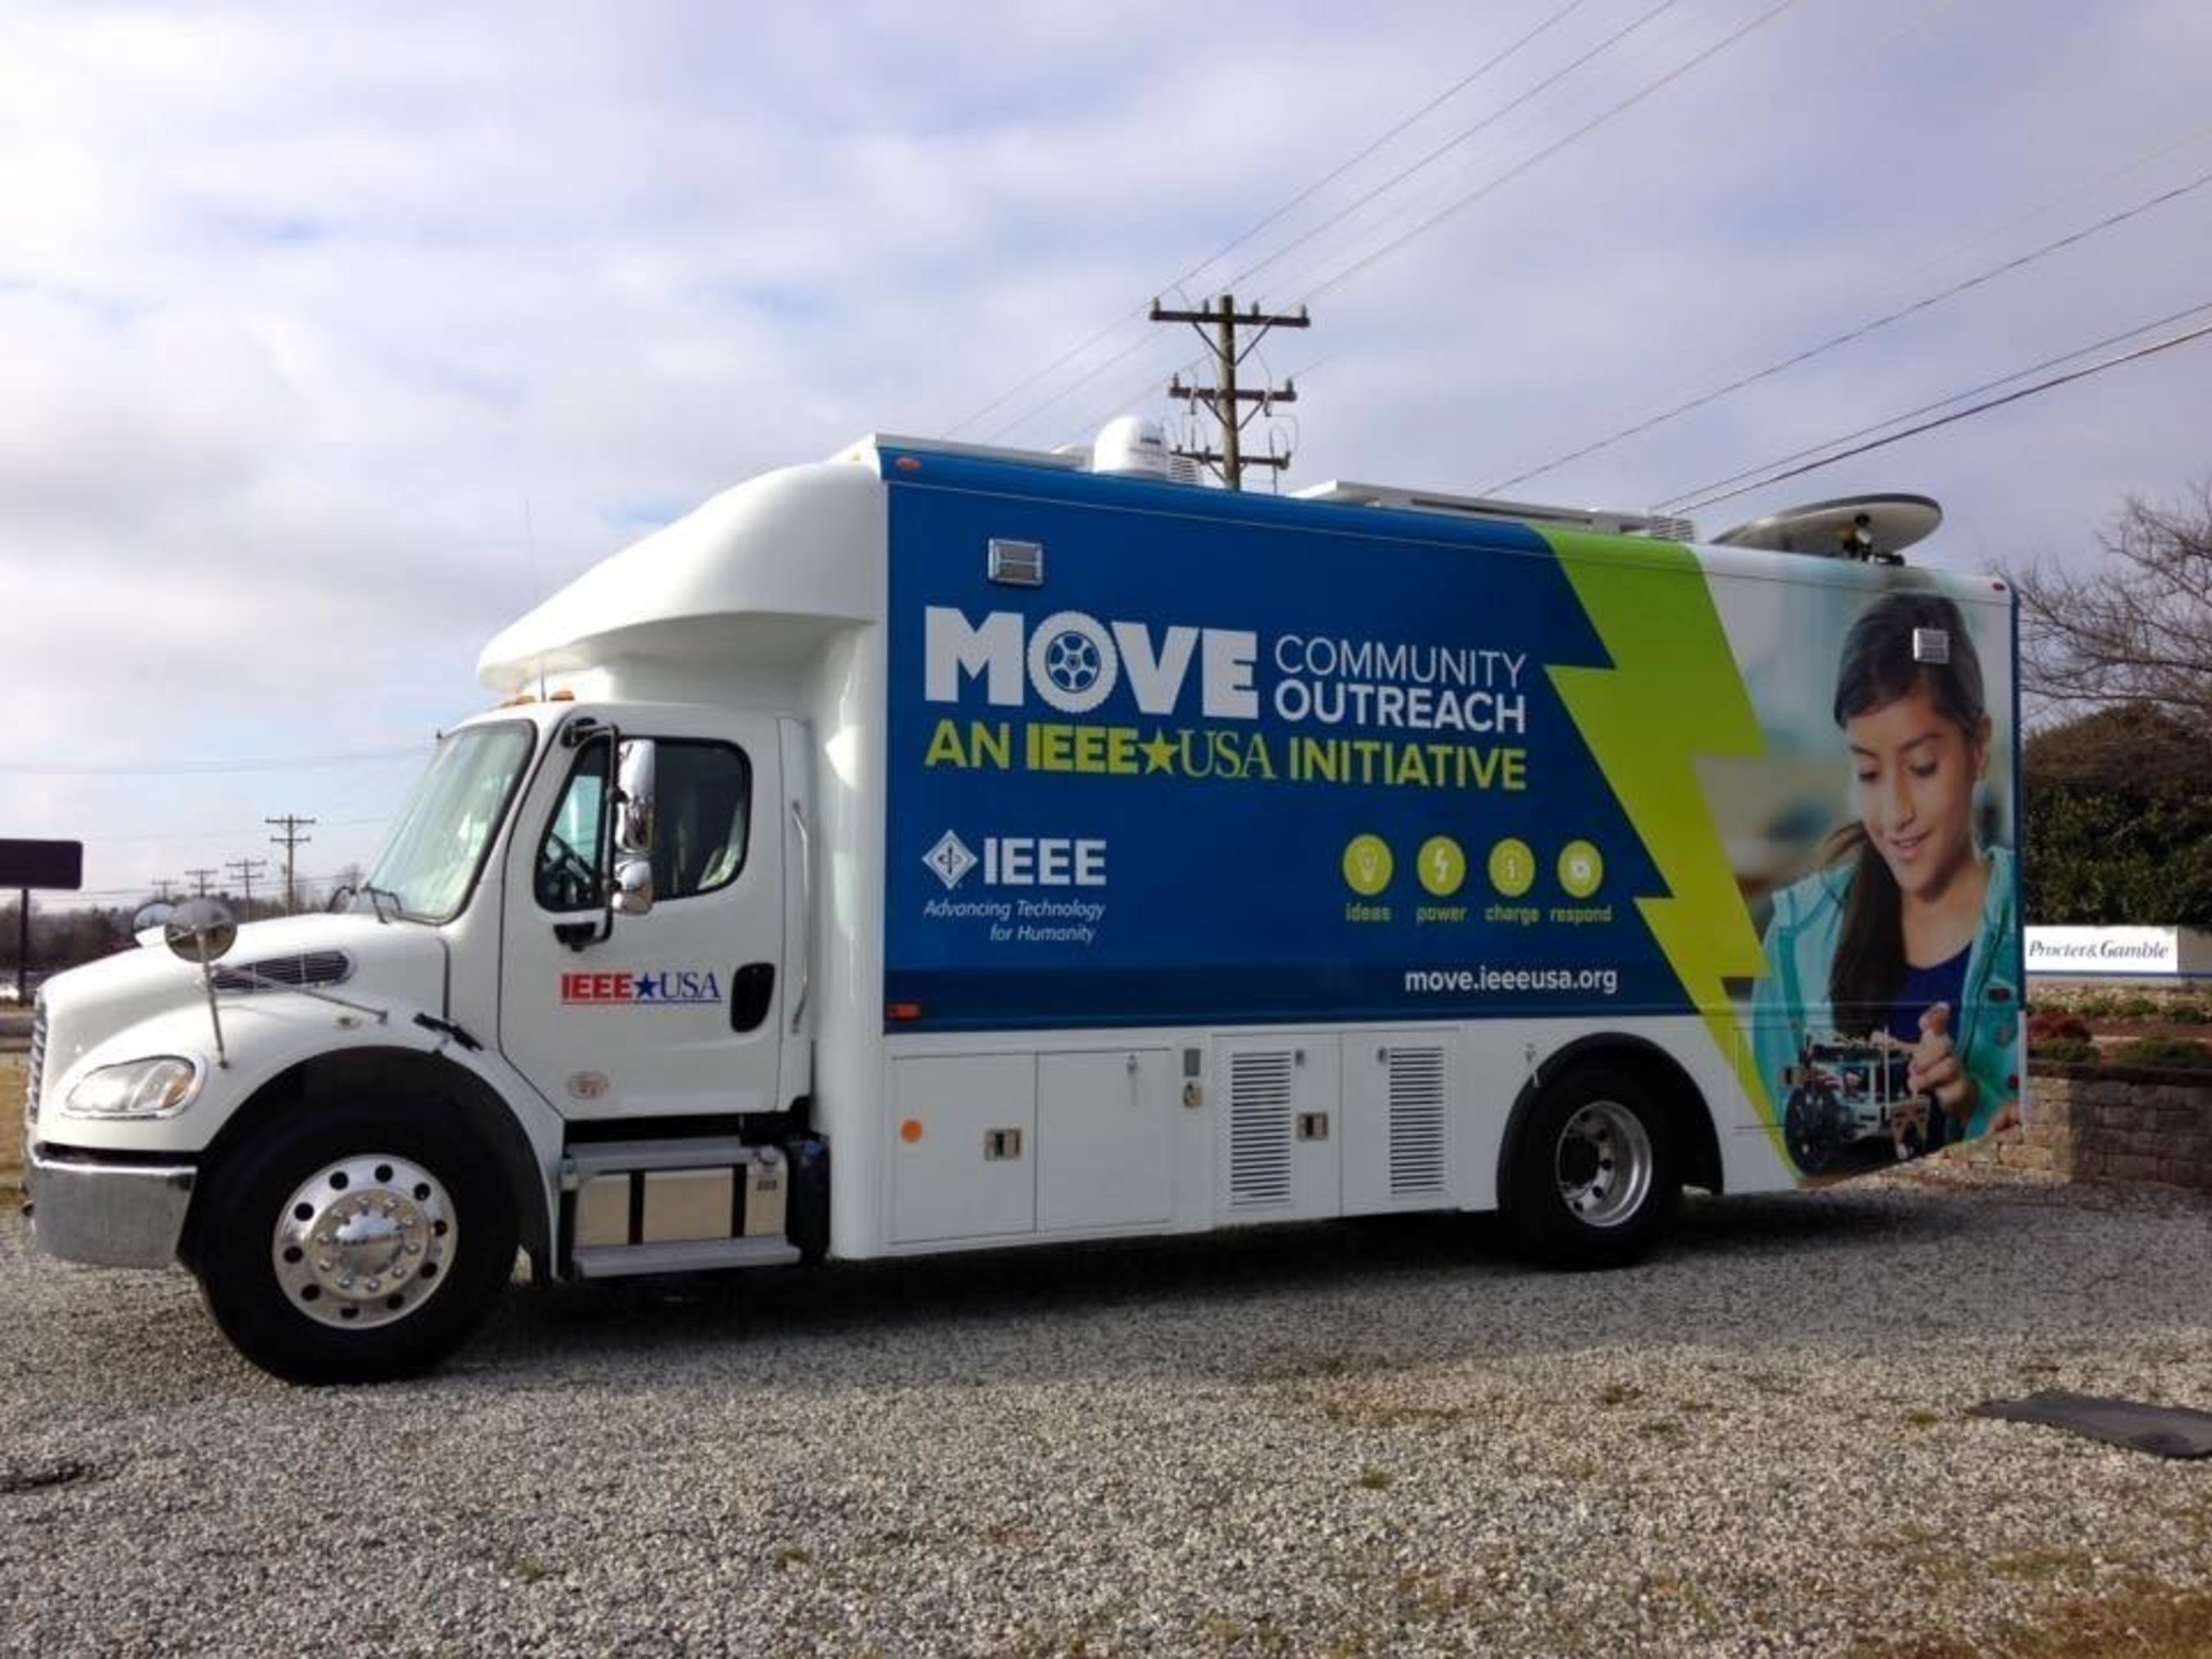 IEEE-USA Mobile Outreach Vehicle